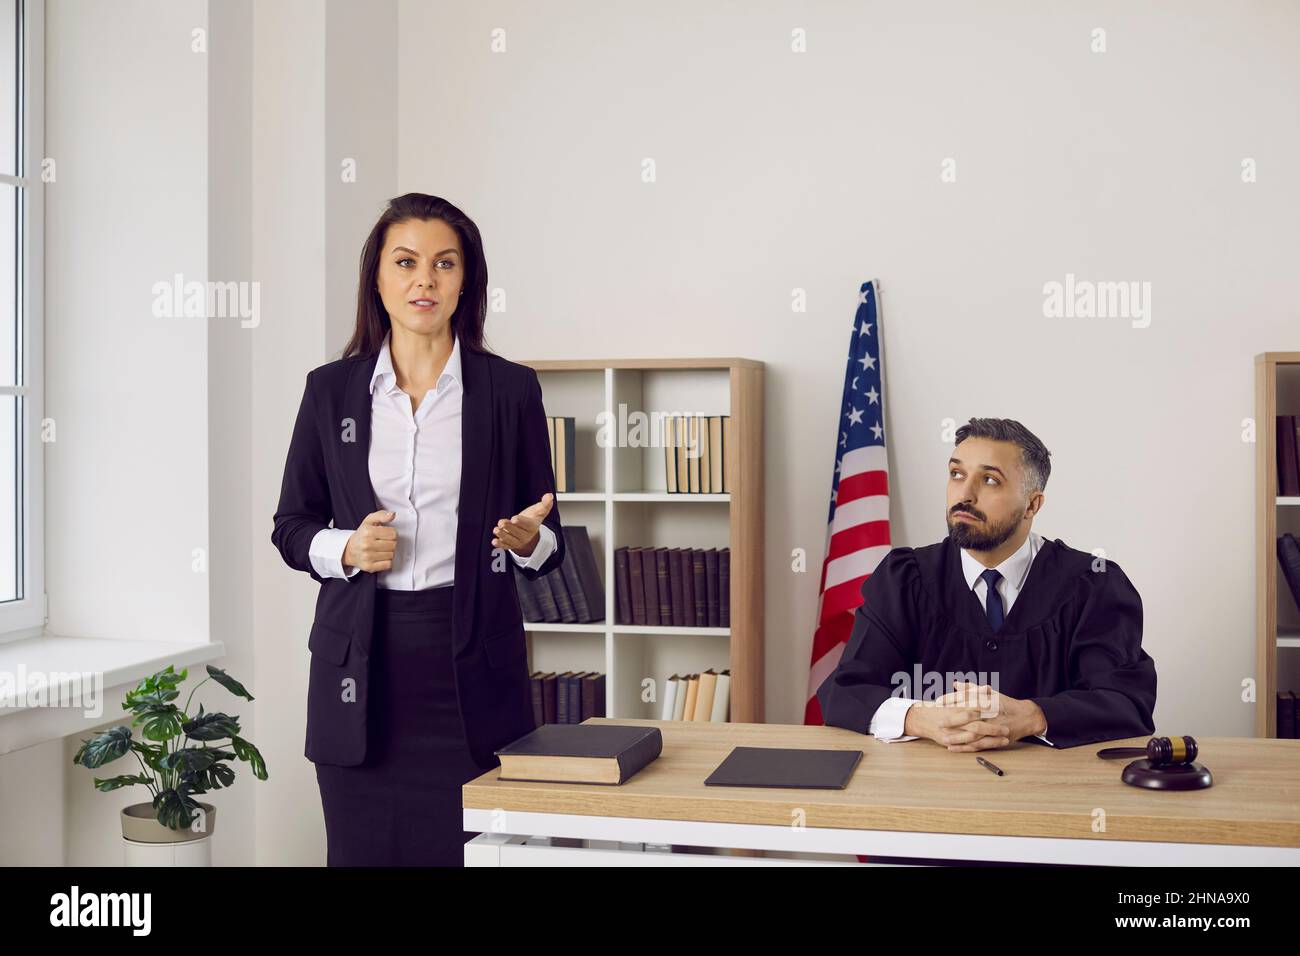 Female lawyer or defense attorney speaking to judge and audience during court trial Stock Photo